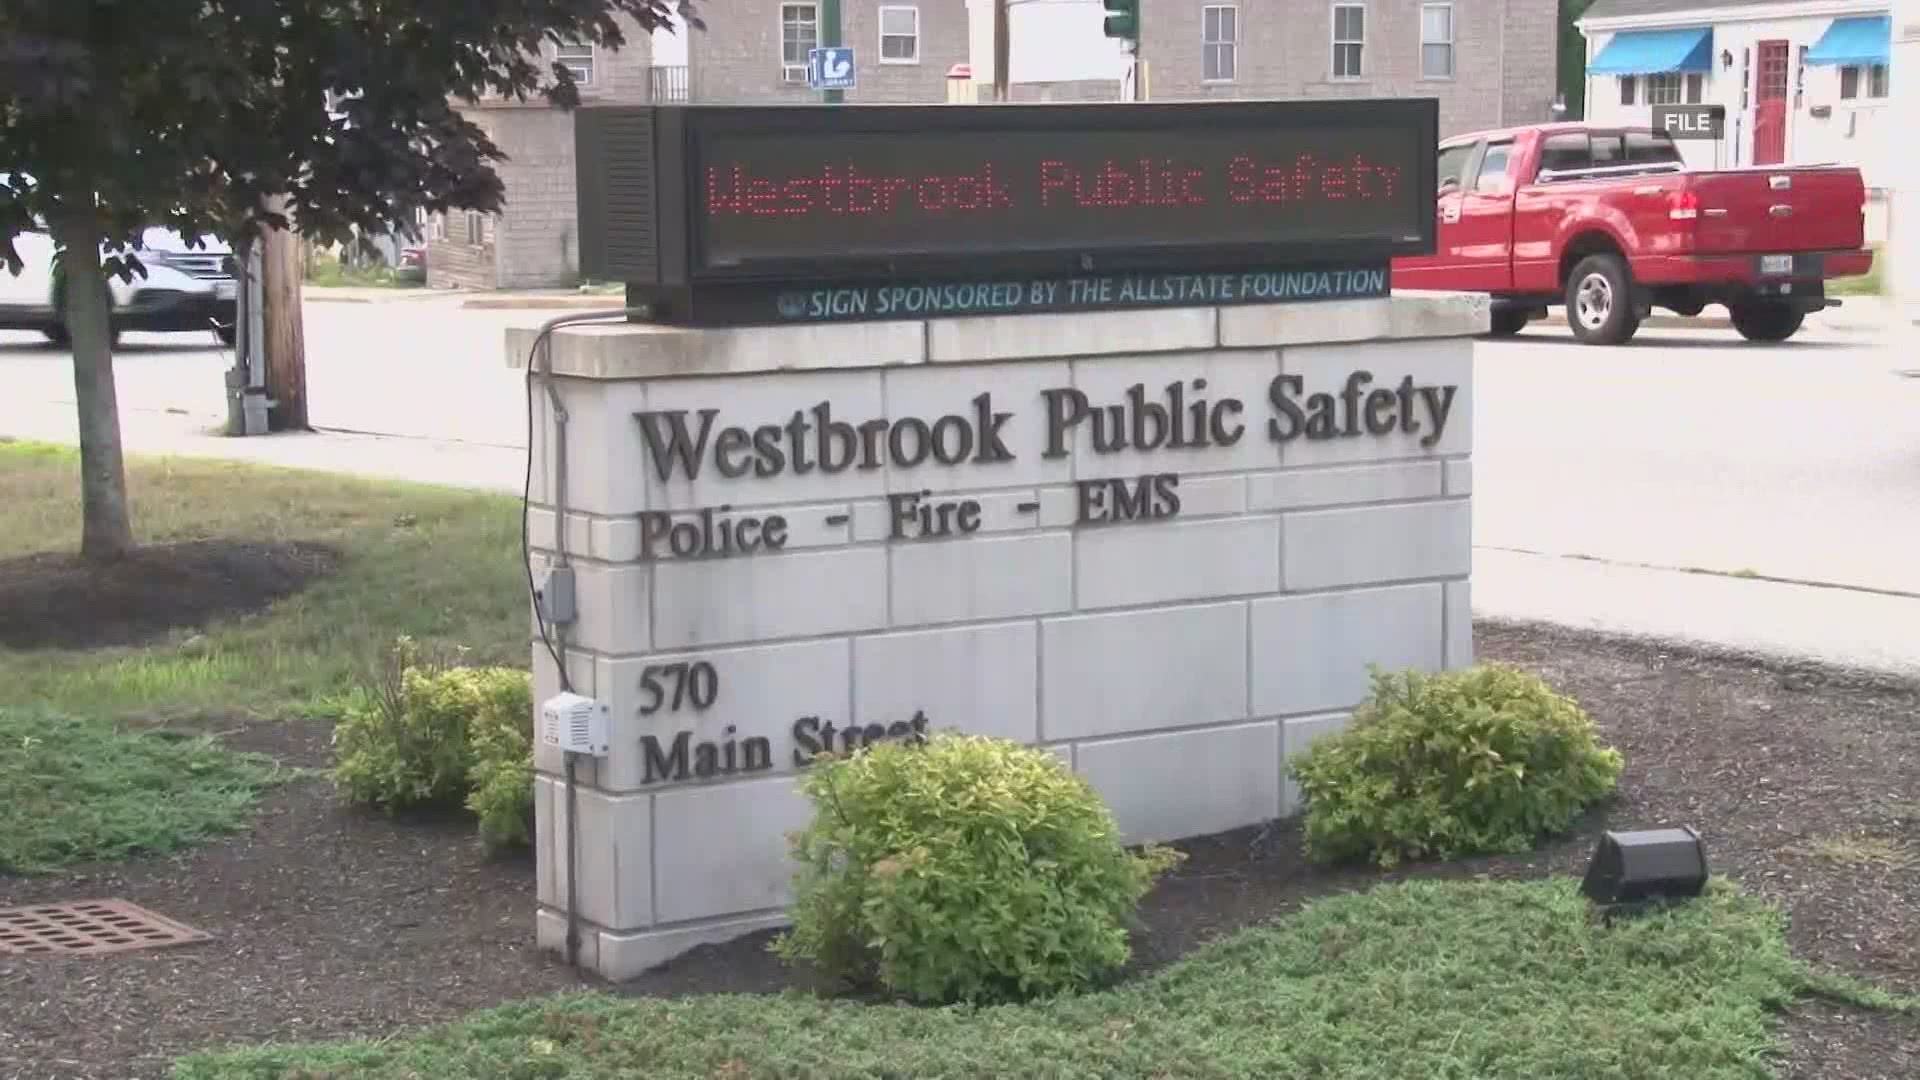 Westbrook PD said they think this uptick in class is in part related to COVID economics and the fact that some in-person services aren't being offered.